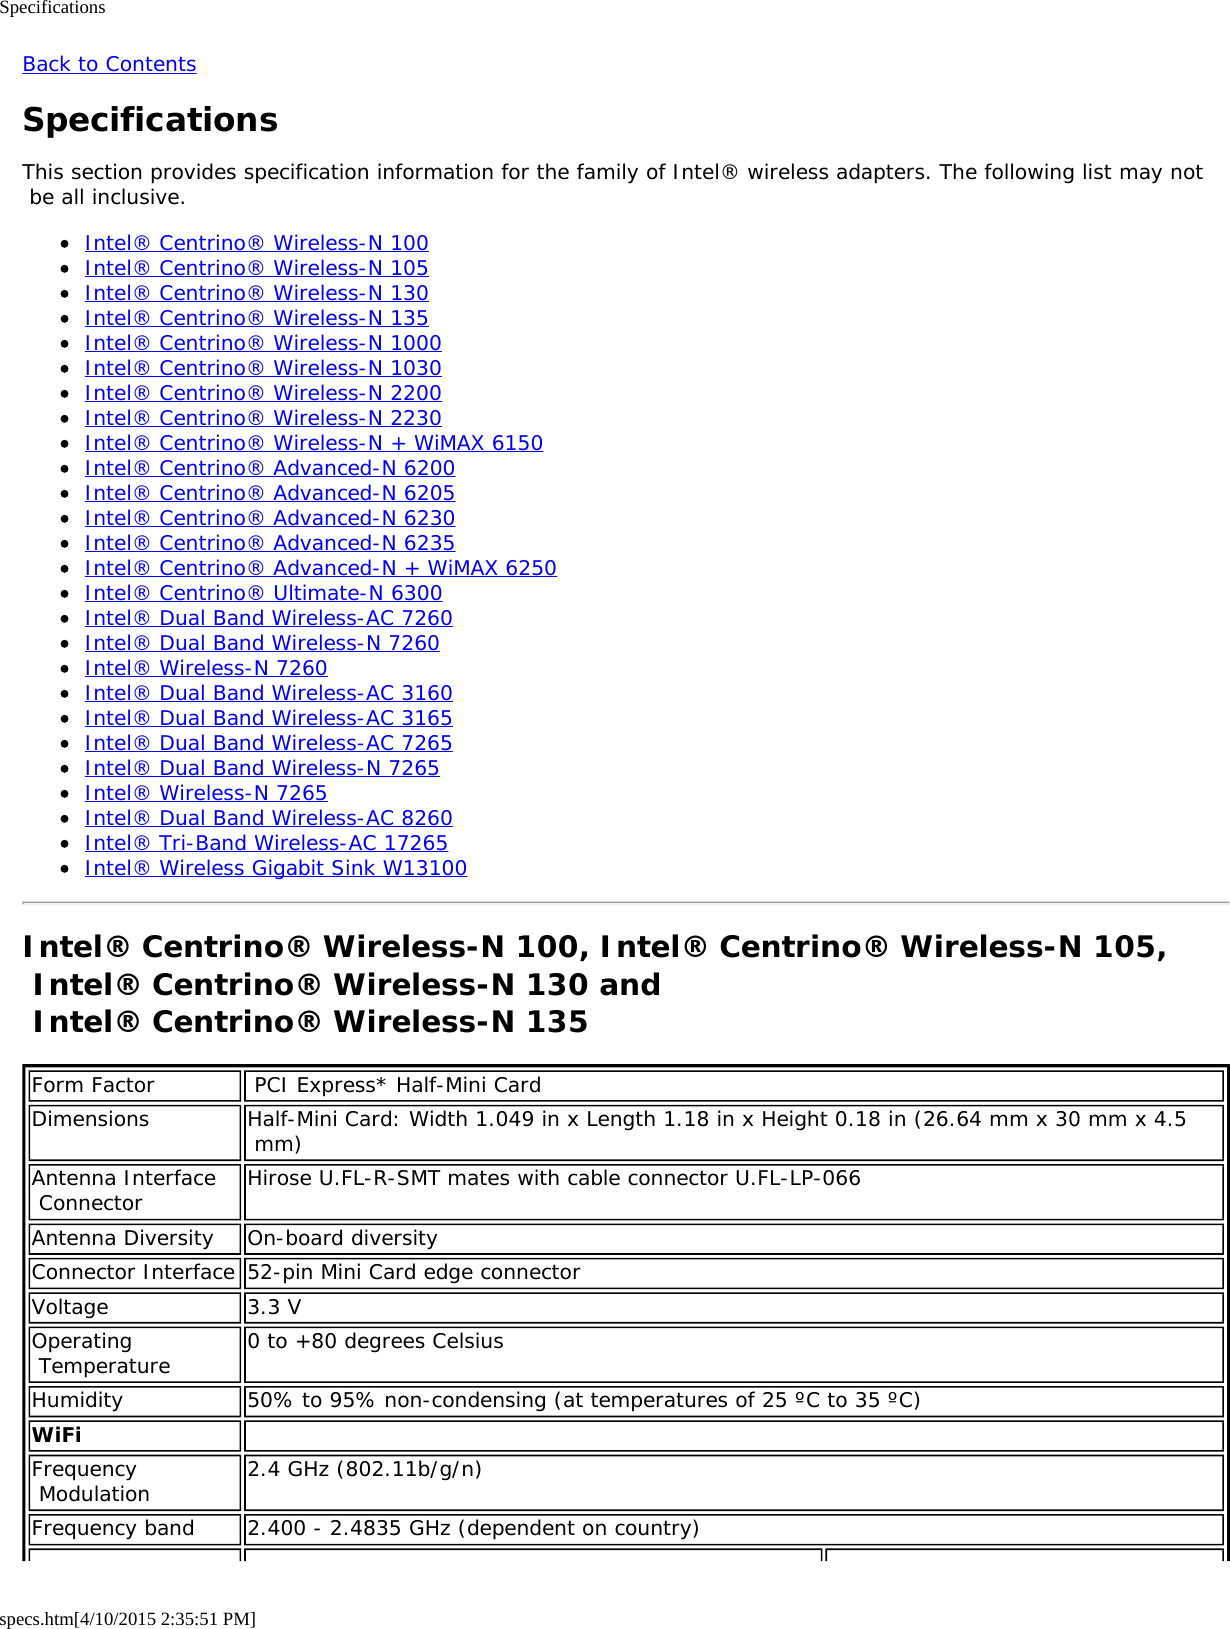 Specificationsspecs.htm[4/10/2015 2:35:51 PM]Back to ContentsSpecificationsThis section provides specification information for the family of Intel® wireless adapters. The following list may not be all inclusive.Intel® Centrino® Wireless-N 100Intel® Centrino® Wireless-N 105Intel® Centrino® Wireless-N 130Intel® Centrino® Wireless-N 135Intel® Centrino® Wireless-N 1000Intel® Centrino® Wireless-N 1030Intel® Centrino® Wireless-N 2200Intel® Centrino® Wireless-N 2230Intel® Centrino® Wireless-N + WiMAX 6150Intel® Centrino® Advanced-N 6200Intel® Centrino® Advanced-N 6205Intel® Centrino® Advanced-N 6230Intel® Centrino® Advanced-N 6235Intel® Centrino® Advanced-N + WiMAX 6250Intel® Centrino® Ultimate-N 6300Intel® Dual Band Wireless-AC 7260Intel® Dual Band Wireless-N 7260Intel® Wireless-N 7260Intel® Dual Band Wireless-AC 3160Intel® Dual Band Wireless-AC 3165Intel® Dual Band Wireless-AC 7265Intel® Dual Band Wireless-N 7265Intel® Wireless-N 7265Intel® Dual Band Wireless-AC 8260Intel® Tri-Band Wireless-AC 17265Intel® Wireless Gigabit Sink W13100Intel® Centrino® Wireless-N 100, Intel® Centrino® Wireless-N 105, Intel® Centrino® Wireless-N 130 and  Intel® Centrino® Wireless-N 135Form Factor  PCI Express* Half-Mini CardDimensions Half-Mini Card: Width 1.049 in x Length 1.18 in x Height 0.18 in (26.64 mm x 30 mm x 4.5 mm)Antenna Interface Connector Hirose U.FL-R-SMT mates with cable connector U.FL-LP-066Antenna Diversity On-board diversityConnector Interface 52-pin Mini Card edge connectorVoltage 3.3 VOperating Temperature 0 to +80 degrees CelsiusHumidity 50% to 95% non-condensing (at temperatures of 25 ºC to 35 ºC)WiFi  Frequency Modulation 2.4 GHz (802.11b/g/n)Frequency band 2.400 - 2.4835 GHz (dependent on country)